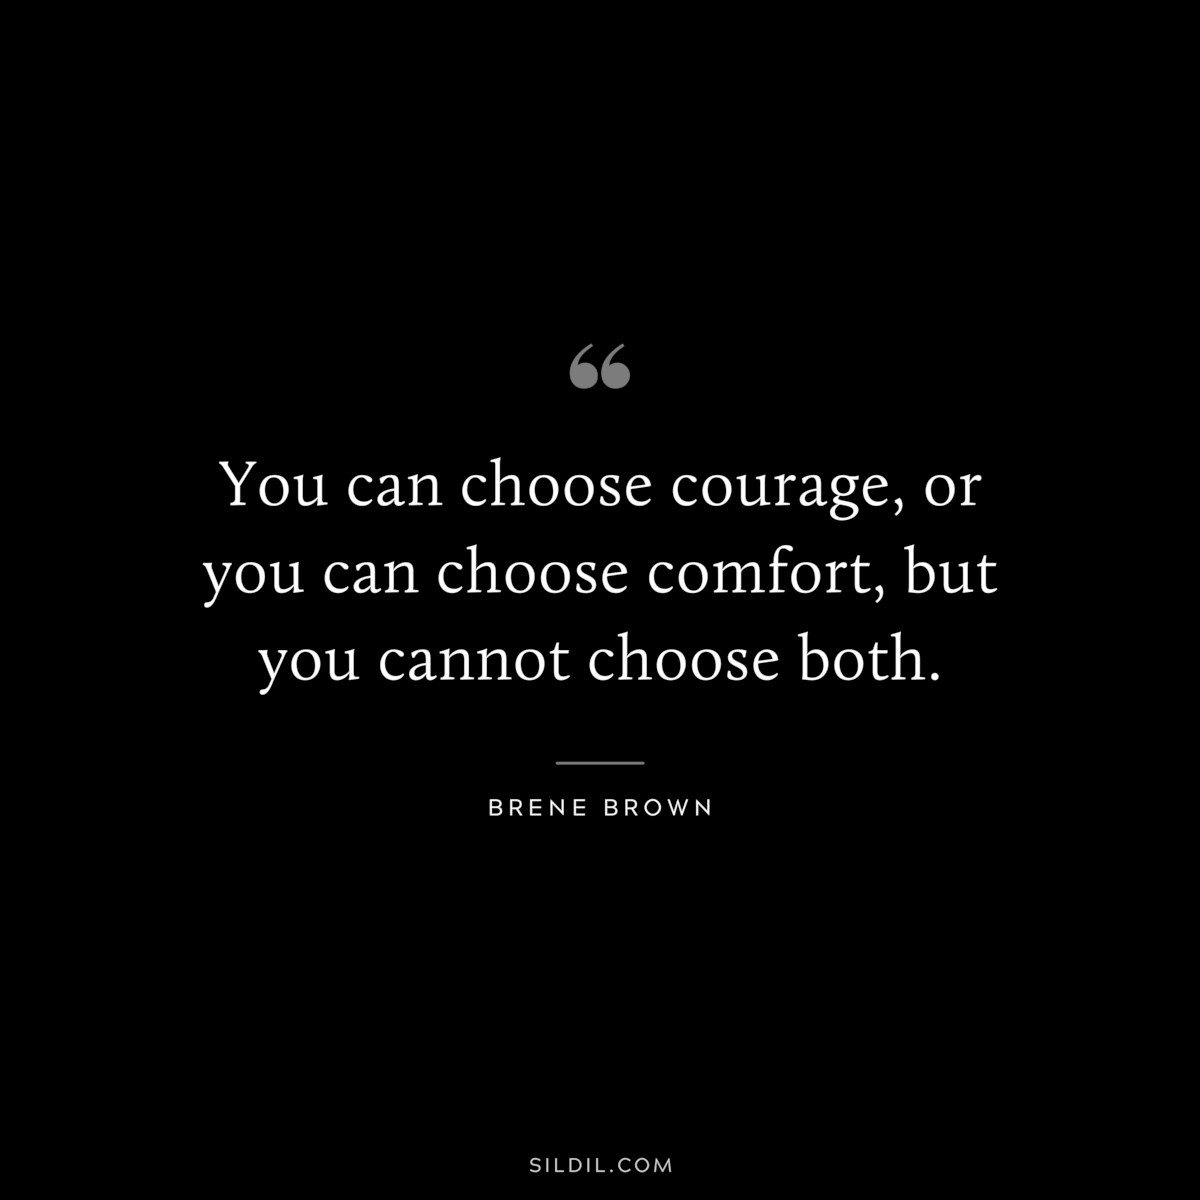 You can choose courage, or you can choose comfort, but you cannot choose both. ― Brene Brown